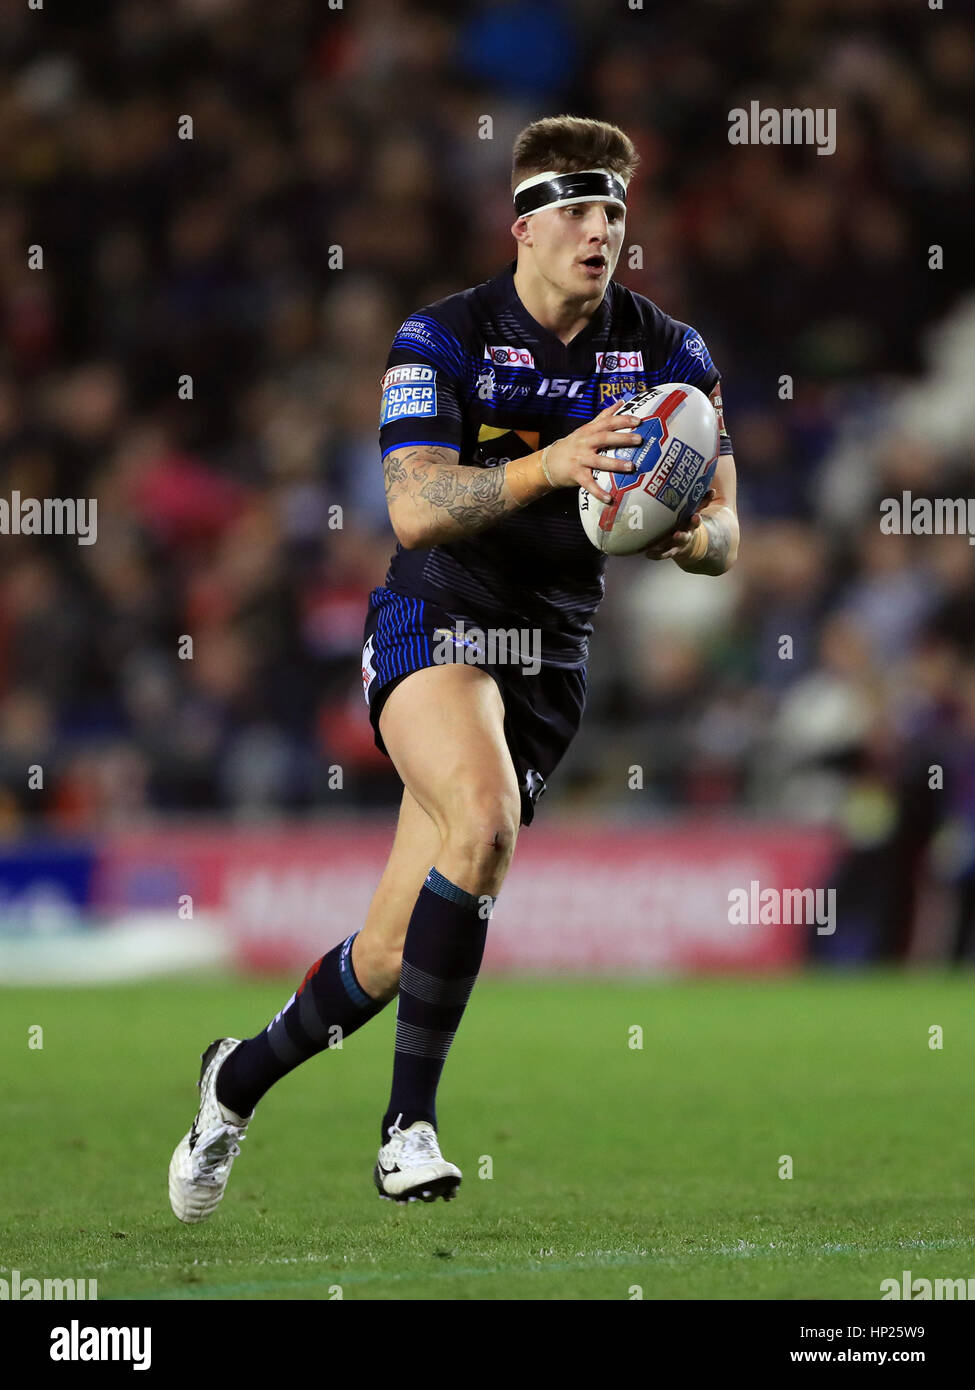 Leeds Rhinos Liam Sutcliffe during the Super League match at Leigh Sports Village. PRESS ASSOCIATION Photo. Picture date: Friday February 17, 2017. See PA story RUGBYL Leigh. Photo credit should read: Tim Goode/PA Wire. Stock Photo